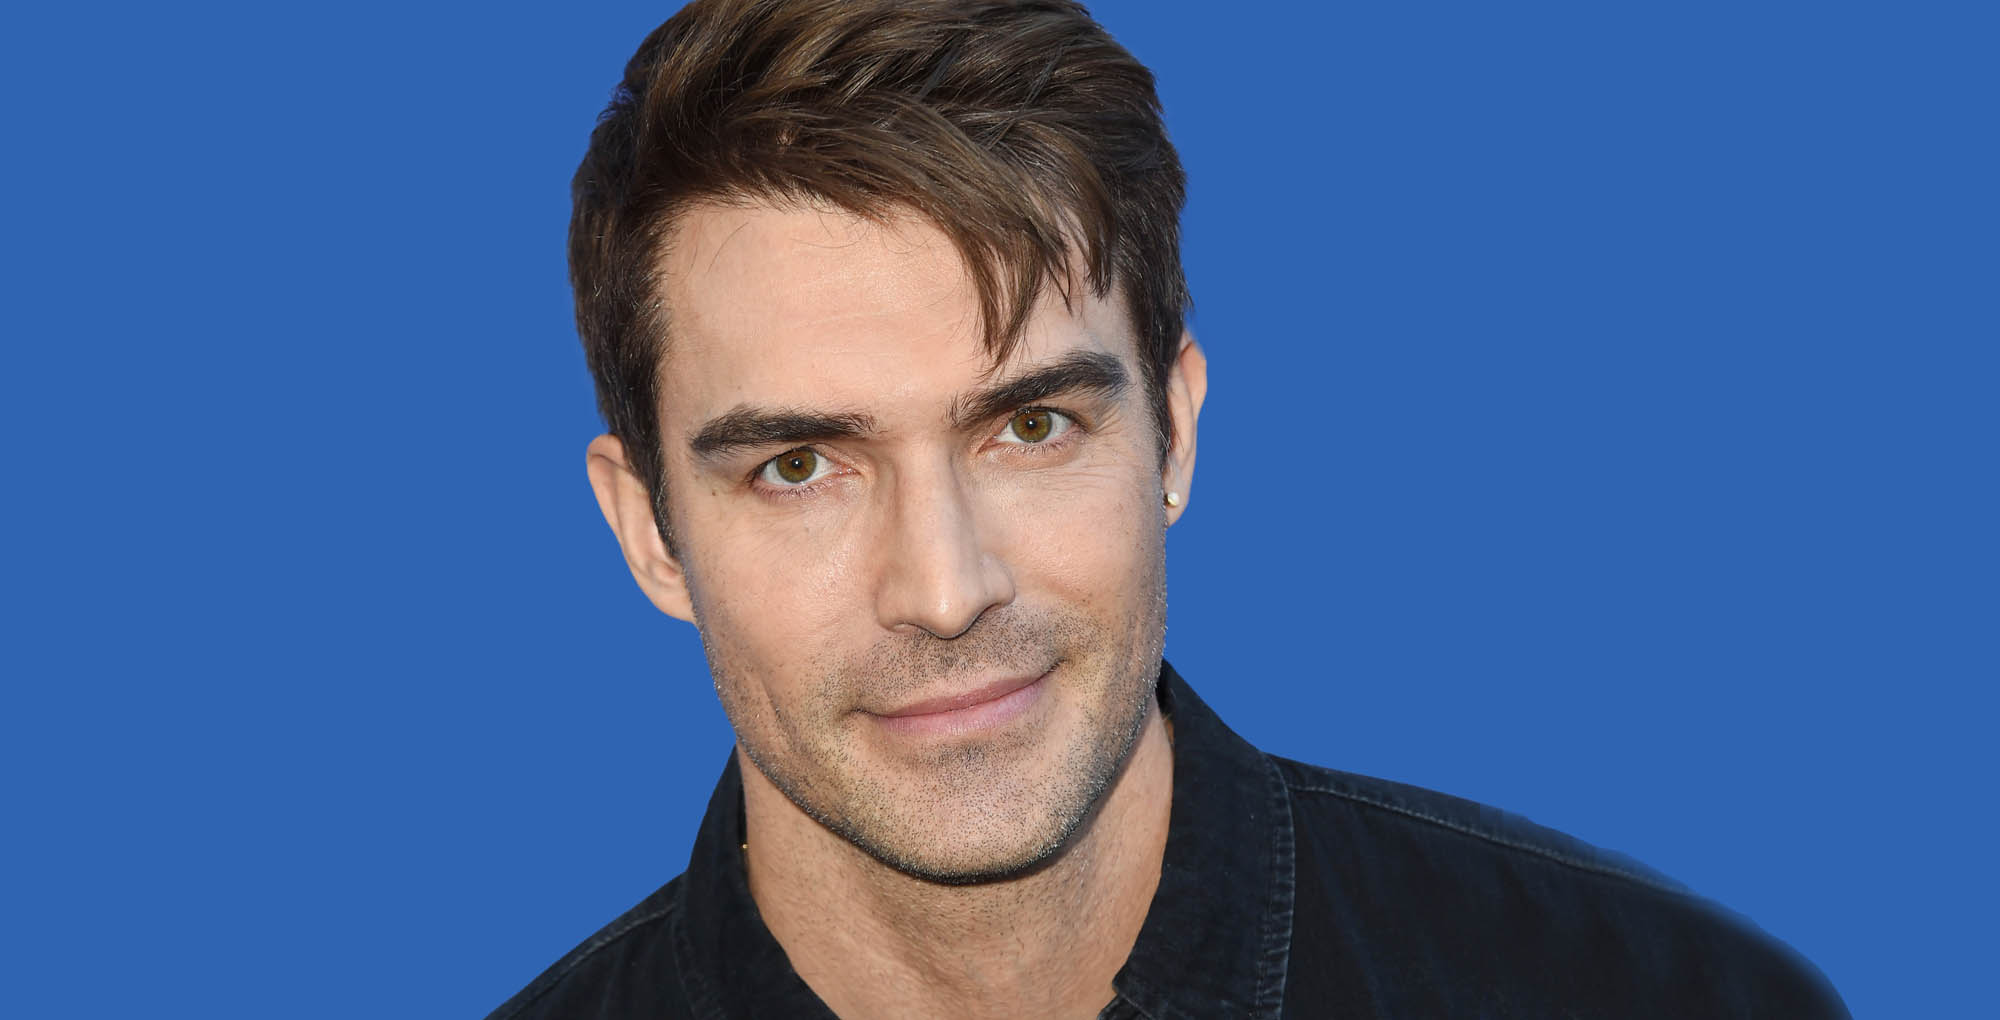 days of our lives star peter porte wearing black against a blue background.